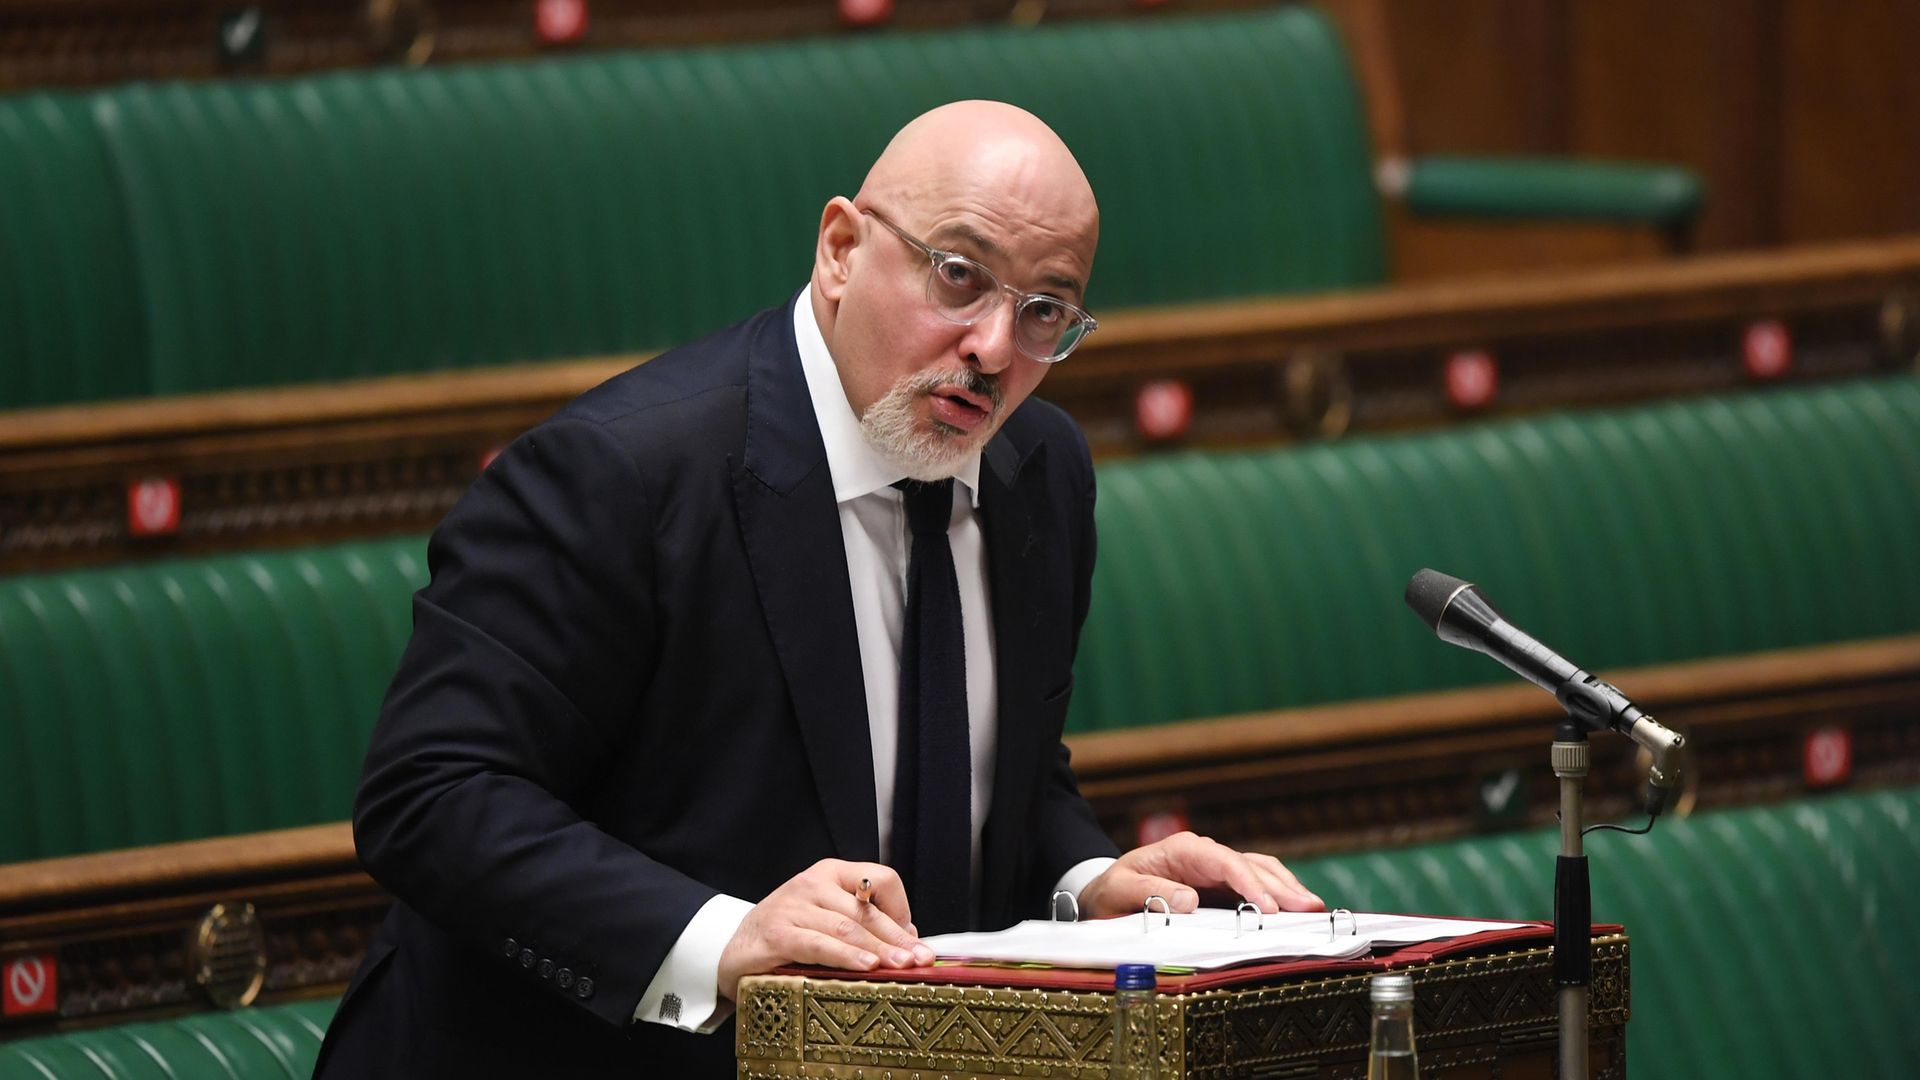 Nadhim Zahawi in the House of Commons - Credit: PA